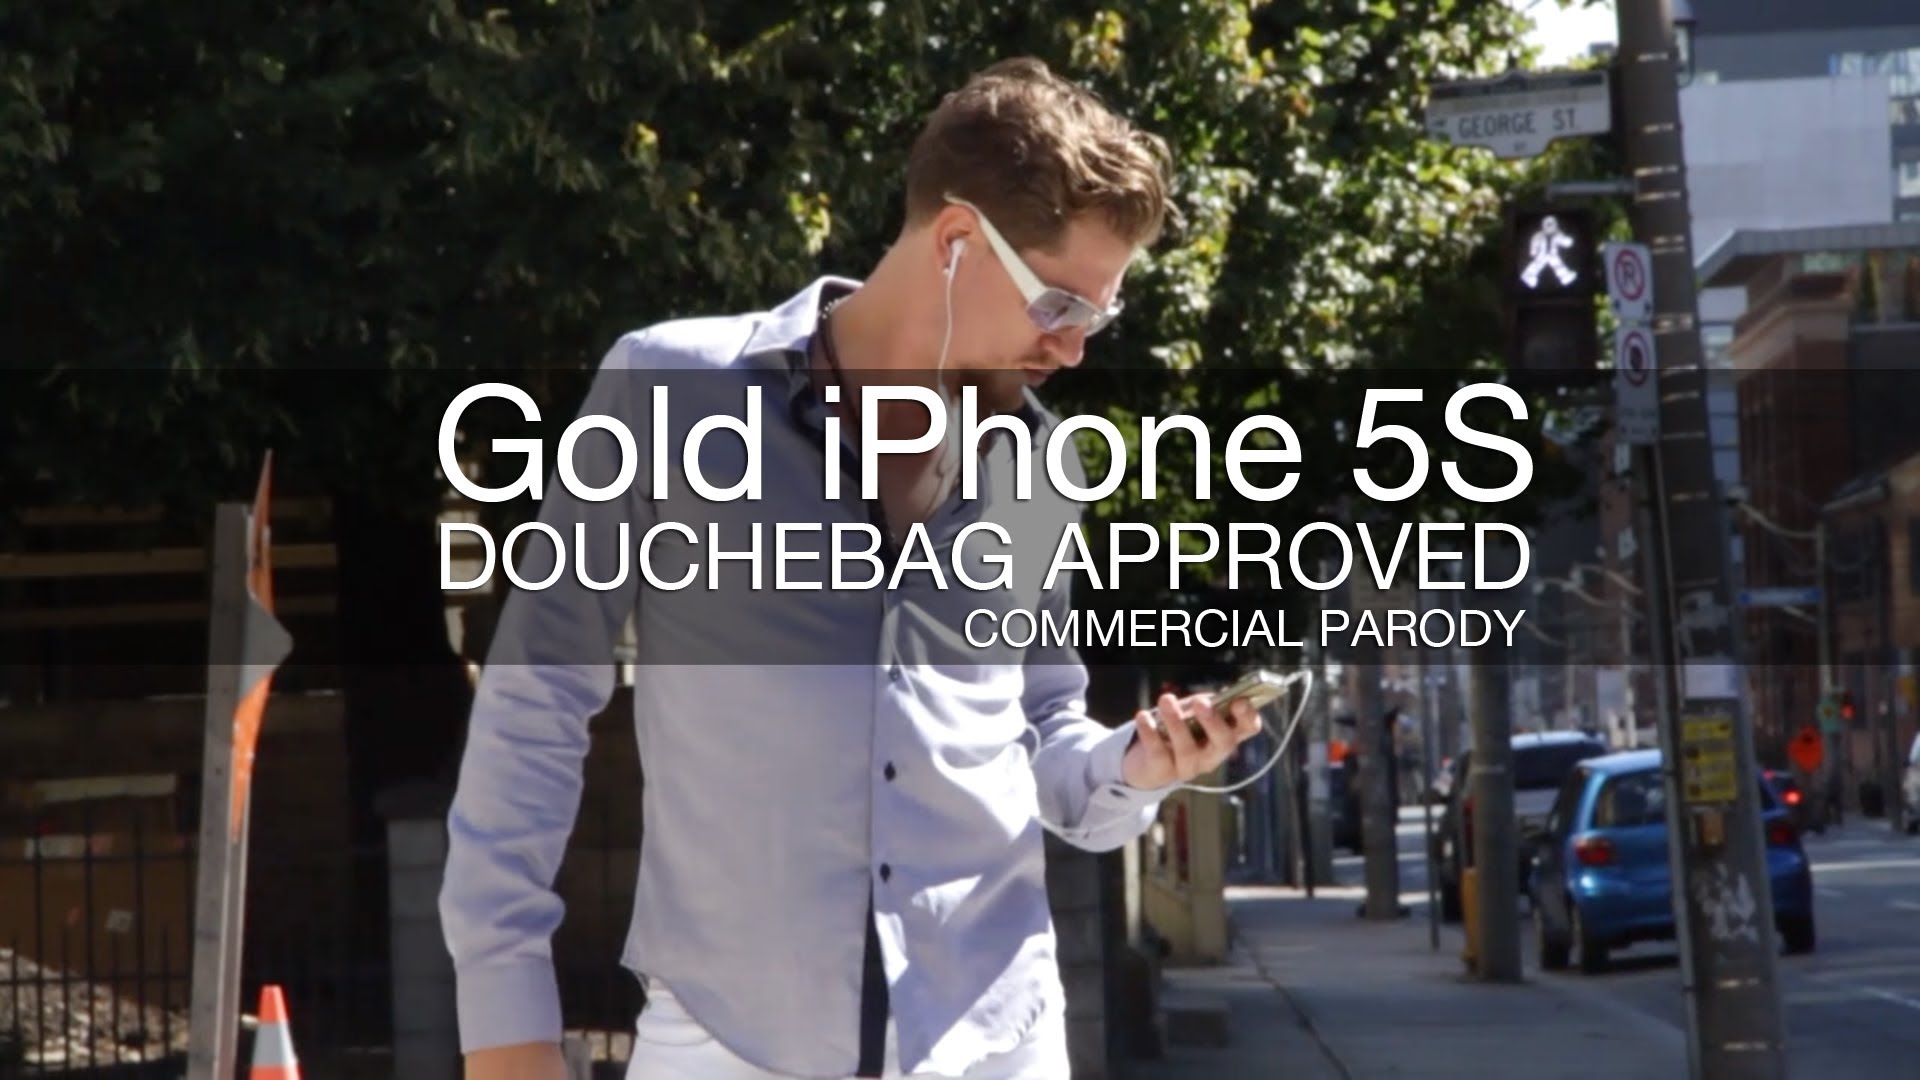 Hilarious Fake Ad Shows Who Will Really Be Buying The Gold iPhone 5S [Video]  | Cult of Mac